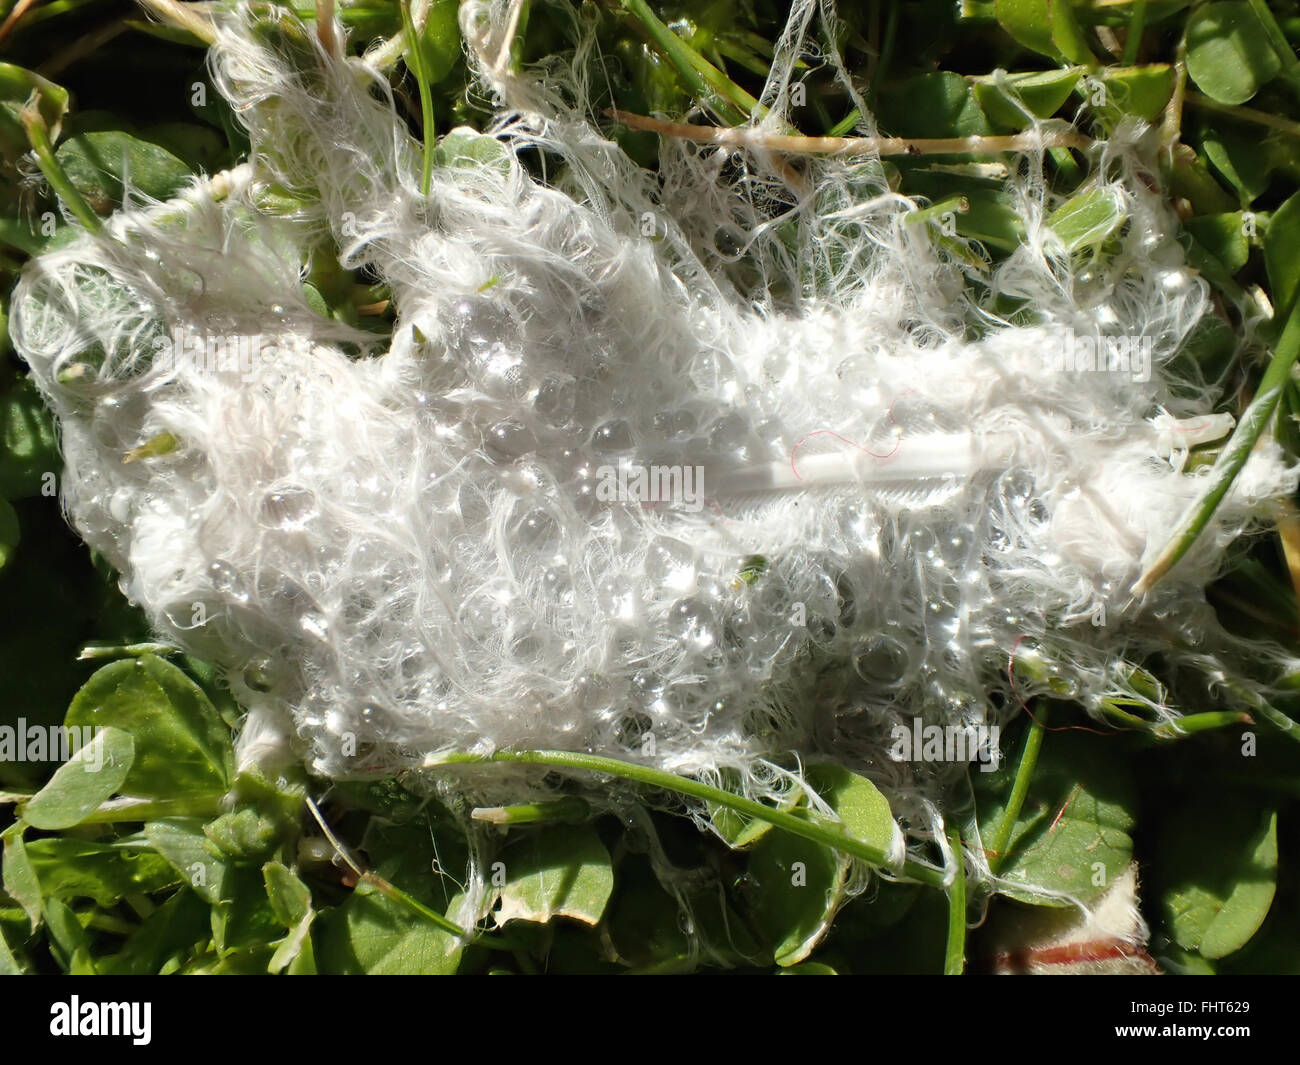 Macro shot of water droplets on a down feather (probably from a collared dove) on a lawn with clover Stock Photo